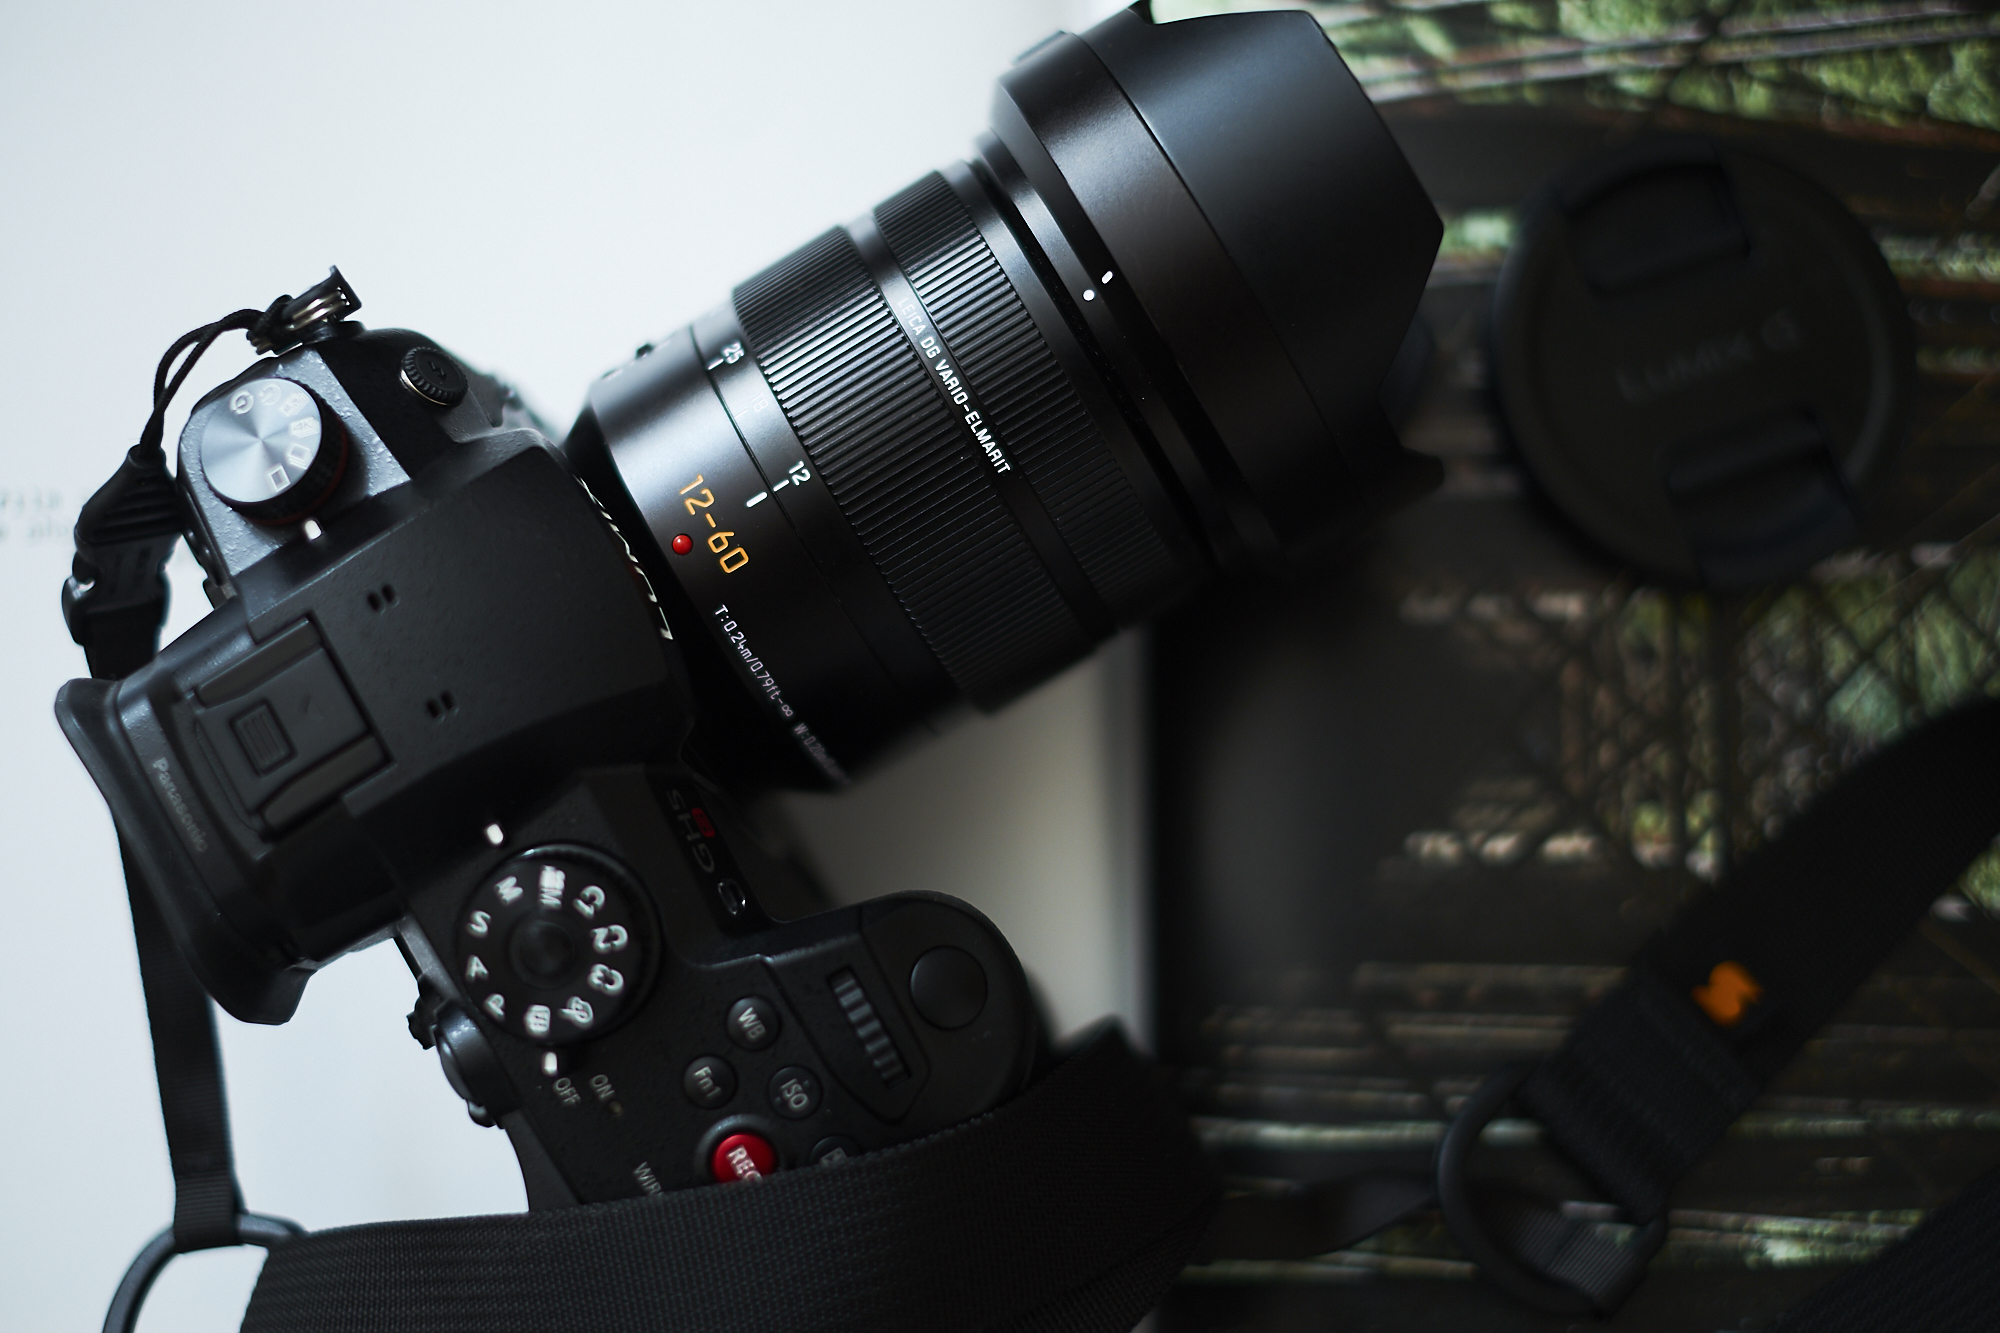 Review: Panasonic 12-60mm f2.8-4 Power OIS (Micro Four Thirds)